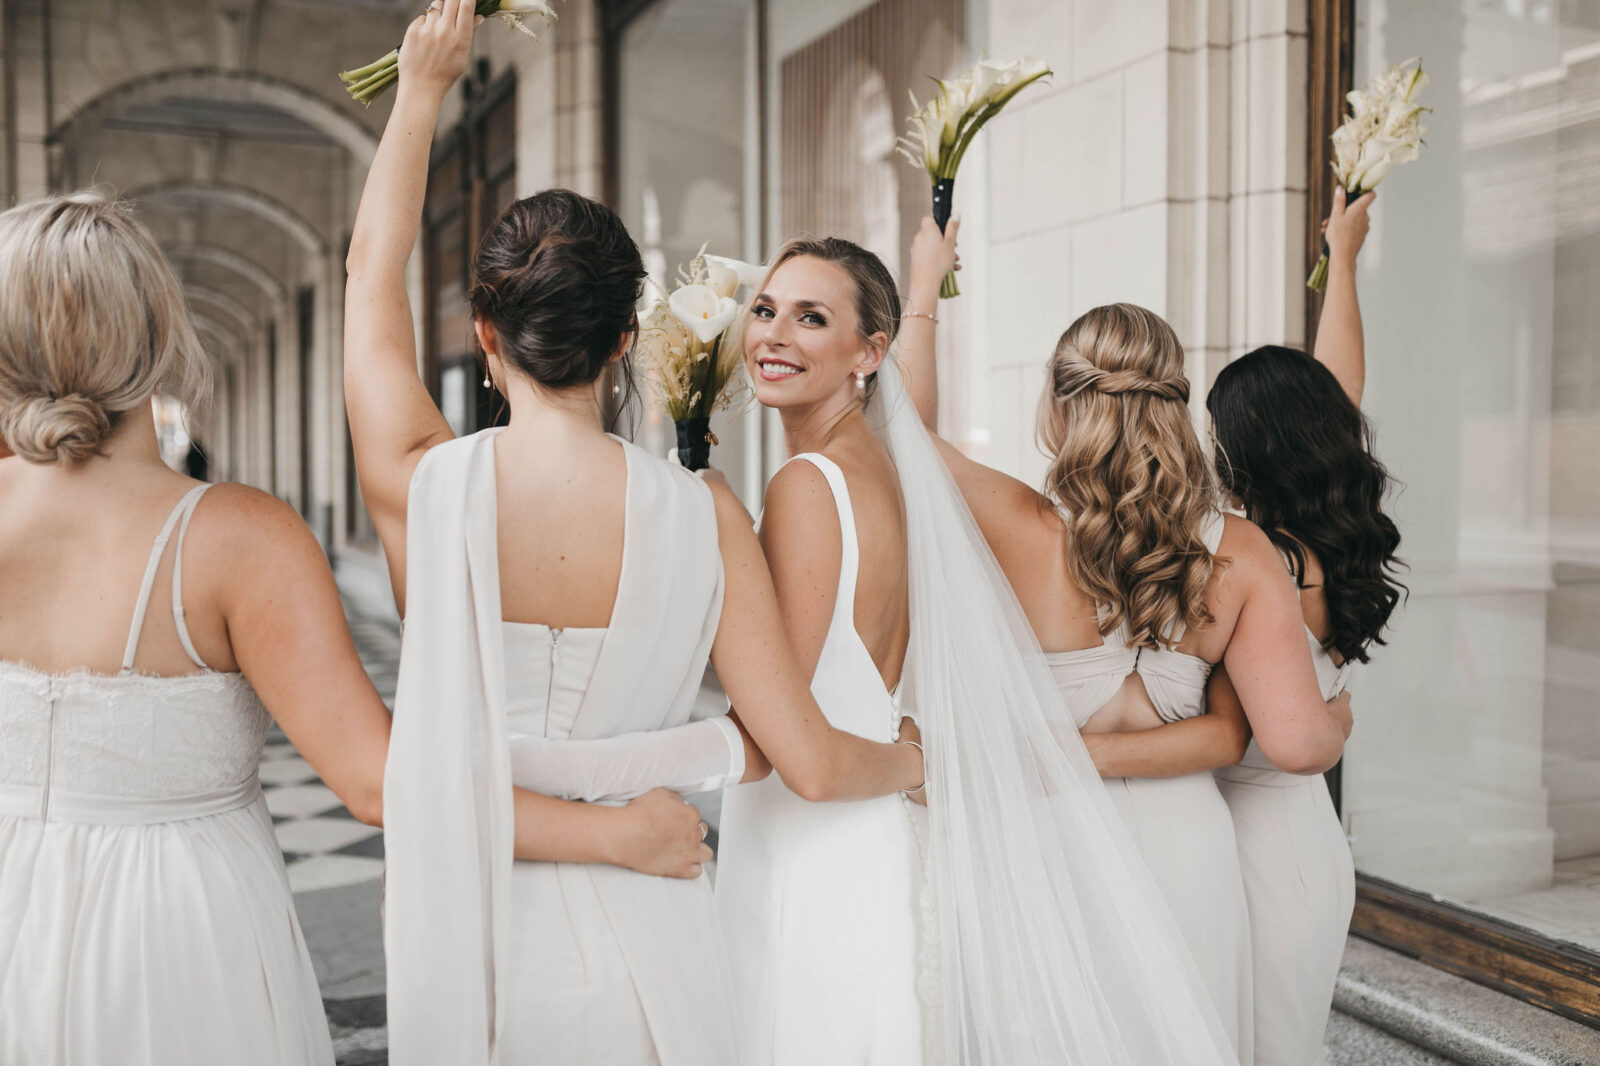 Wedding Timeline Advice: How to Create Your Wedding Timeline, wit Professional Advice from local planner Fiore Fine Events | Bronte Bride Blog